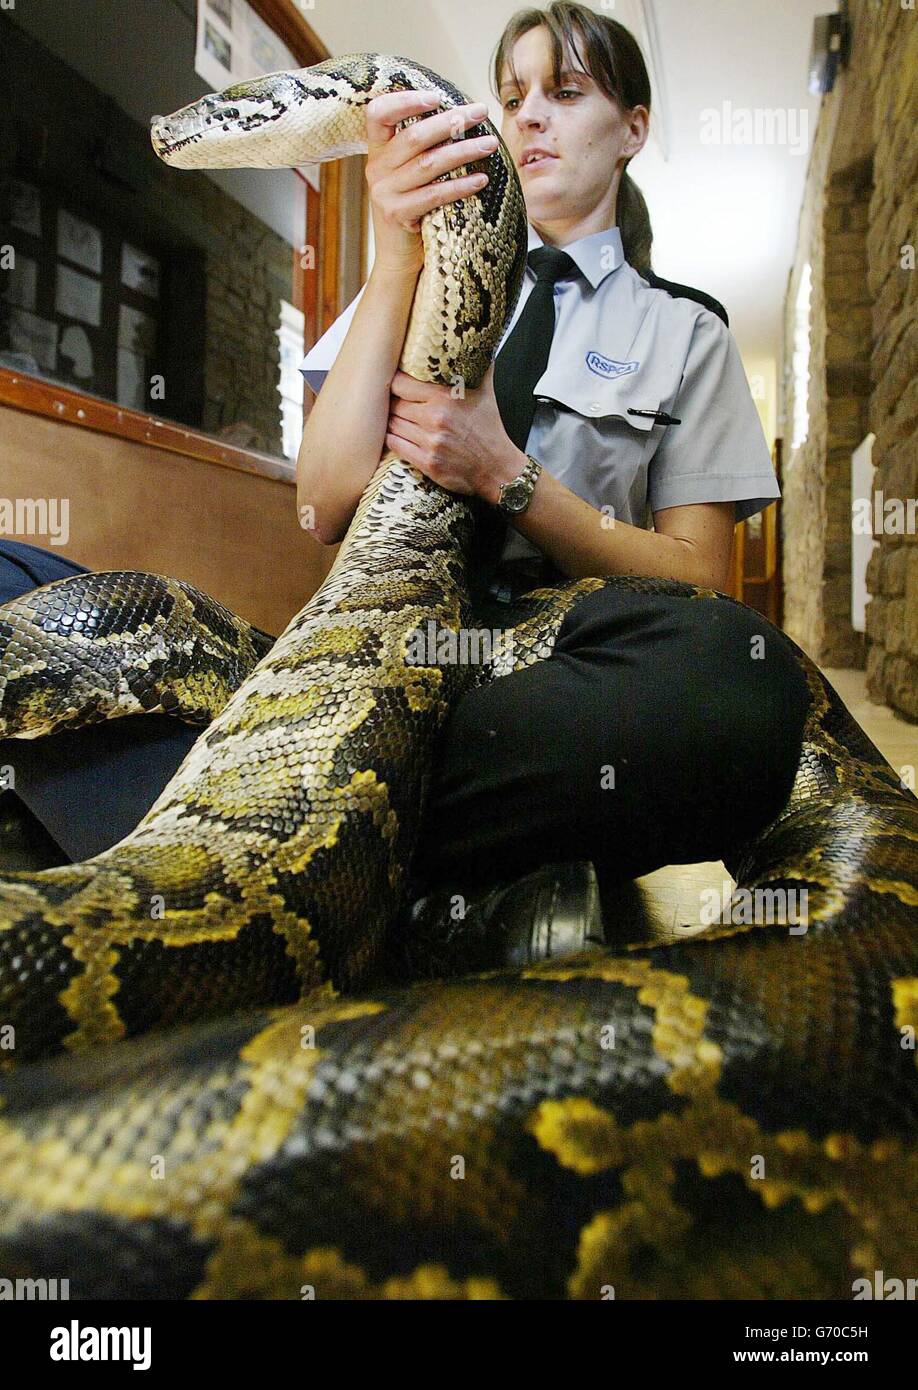 Jackie Paradis from the R.S.P.C.A holds Molly, a 16ft Burmese Python at the Exotic Animal Welfare Trust in Tow Law, County Durham as an RSPCA report, claims that a 'considerable' number of exotic pet owners lack the experience or knowledge to properly look after their animals. A large part of the blame is put down to poor standards of help and advice offered to novice owners by pet shops, with the report also highlighting a lack of vets able to provide treatment for exotic animals. Stock Photo